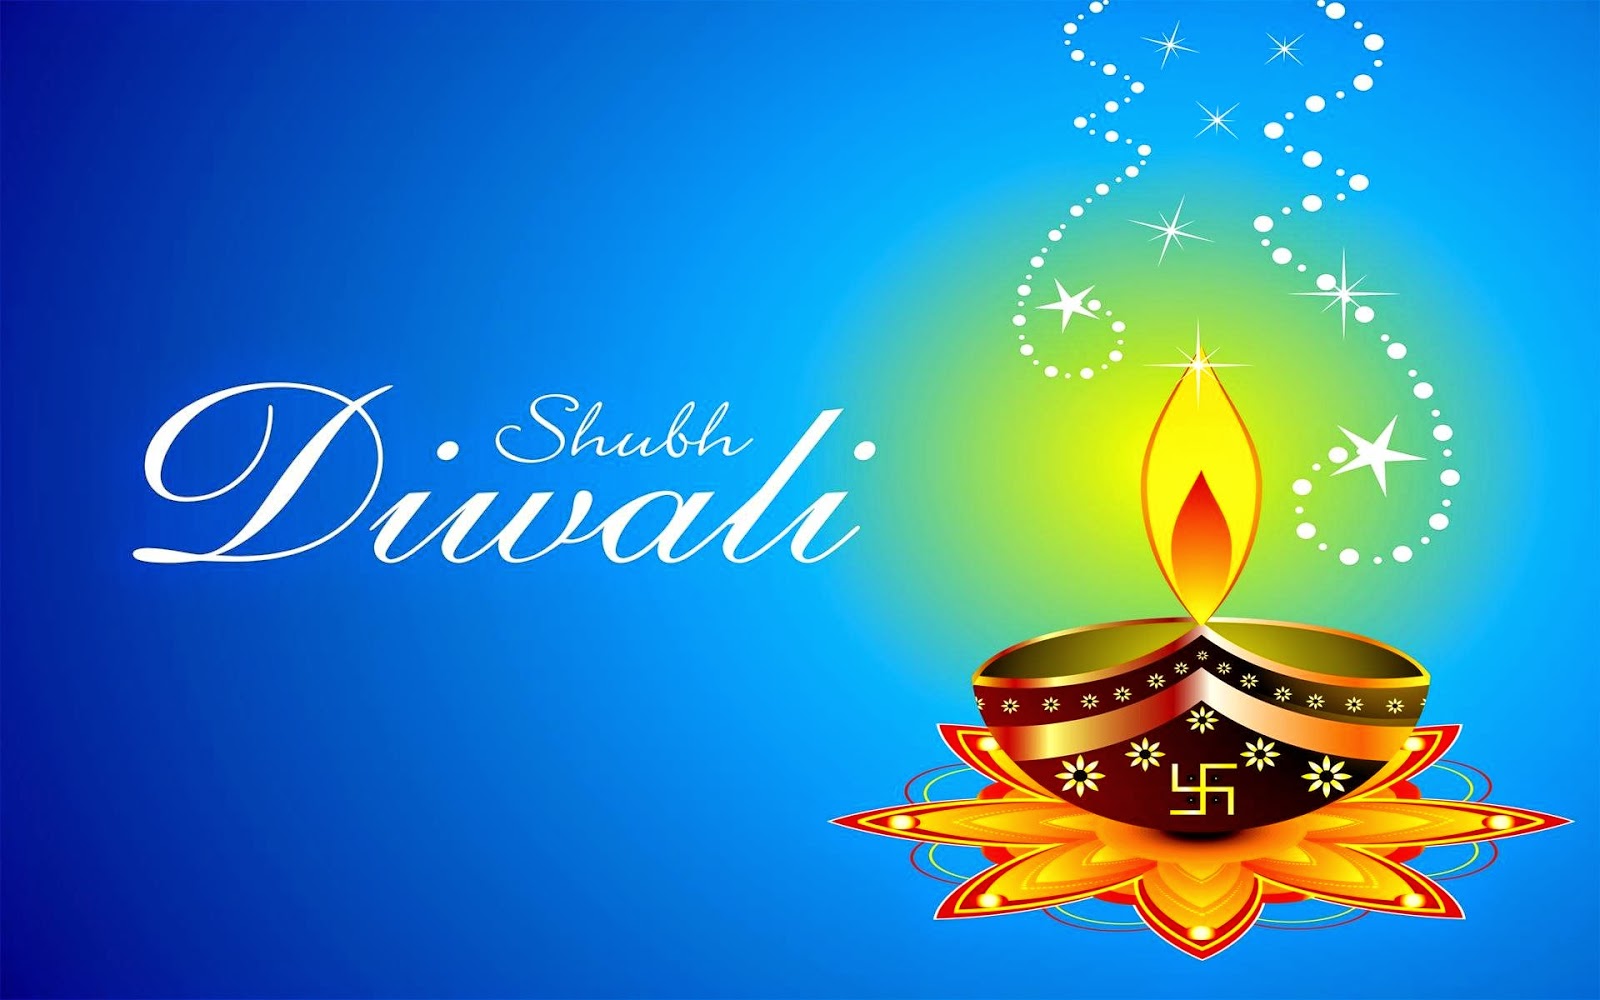 ... 2014 HD Quality / Widescreen Free Download | happy diwali 2014 wishes